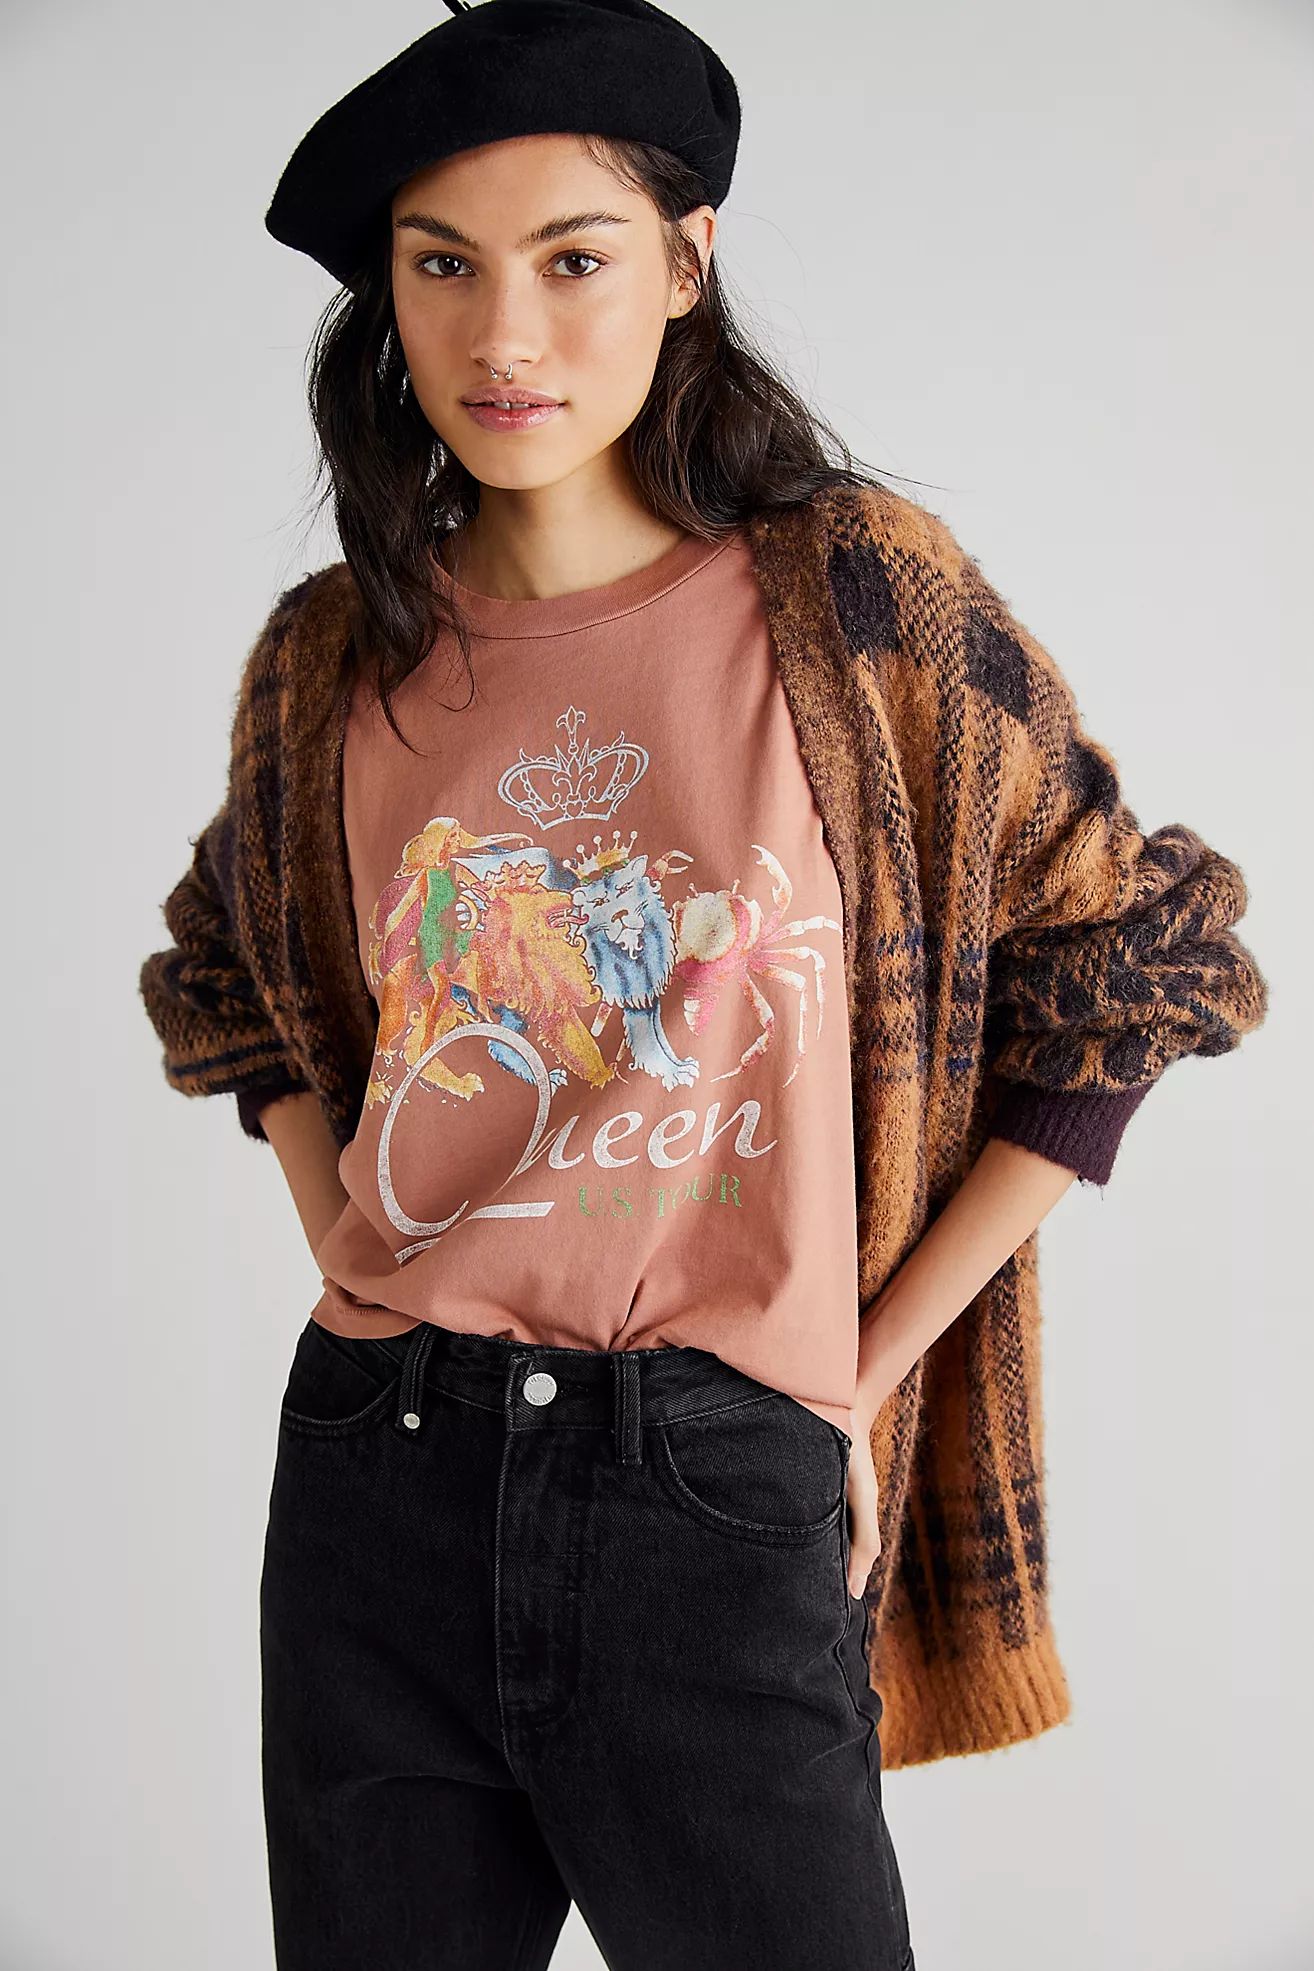 Queen US Tour Merch Tee | Free People (Global - UK&FR Excluded)